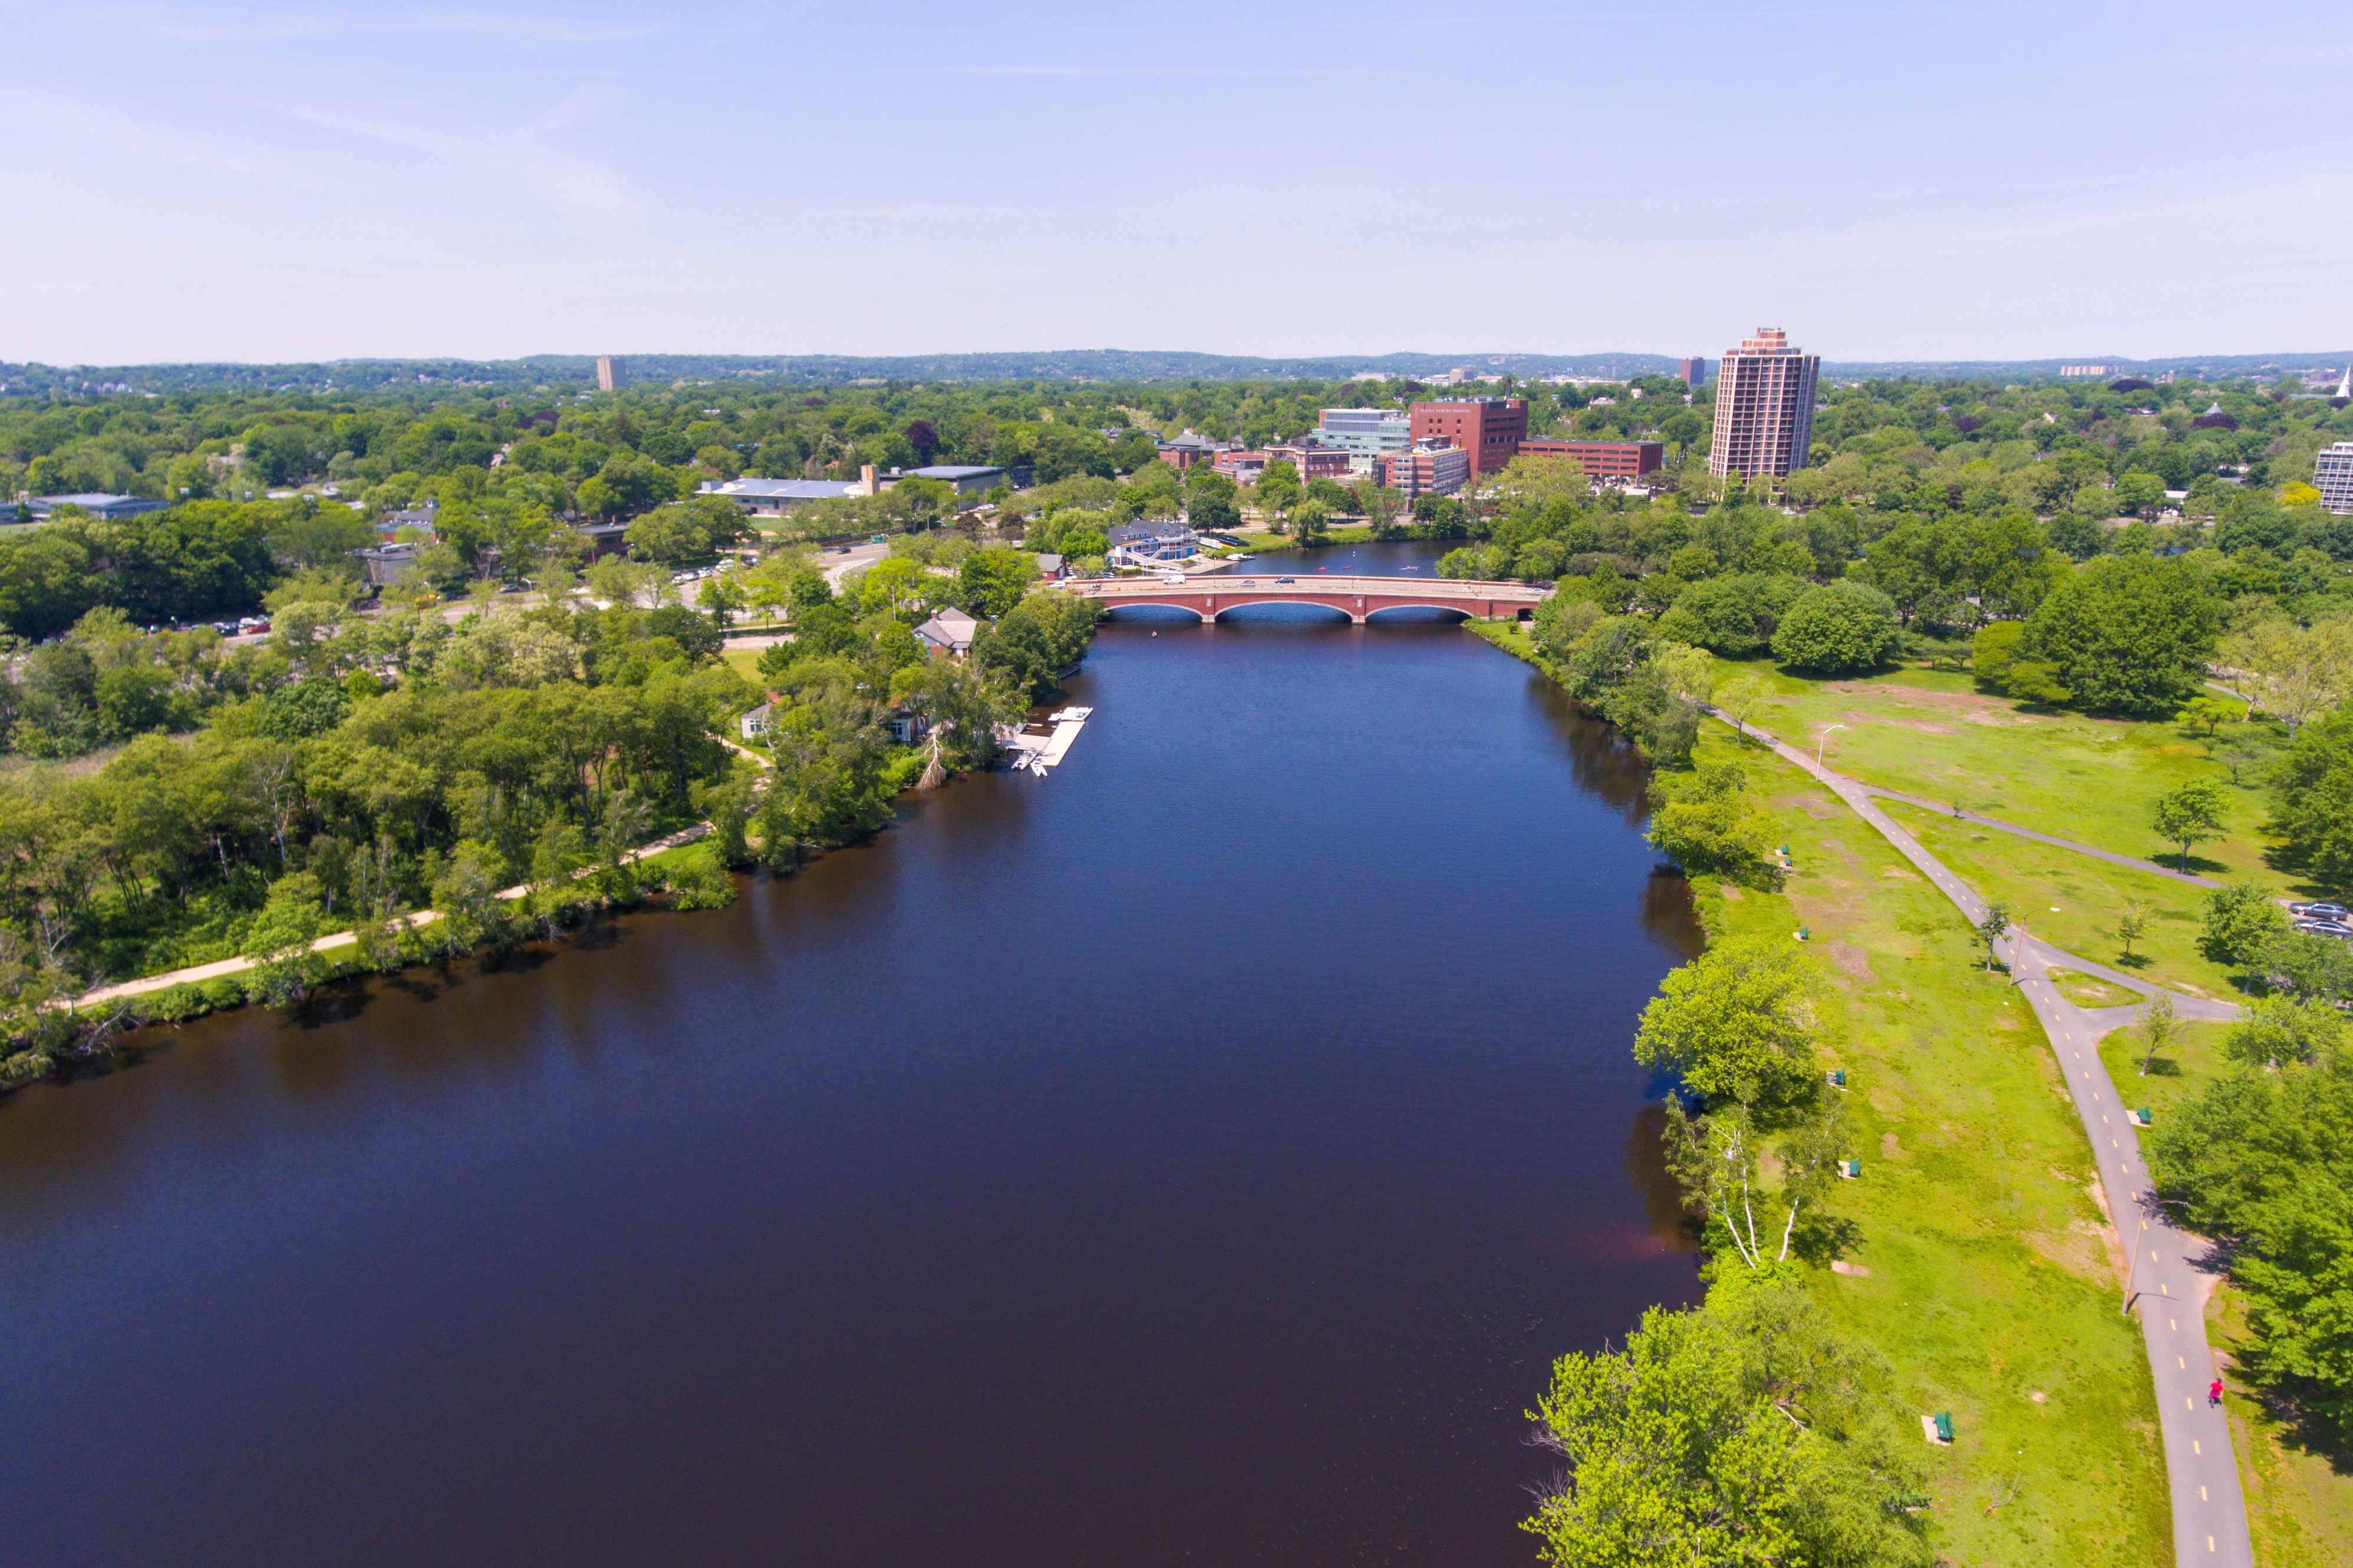 Charles River in Allston, MA